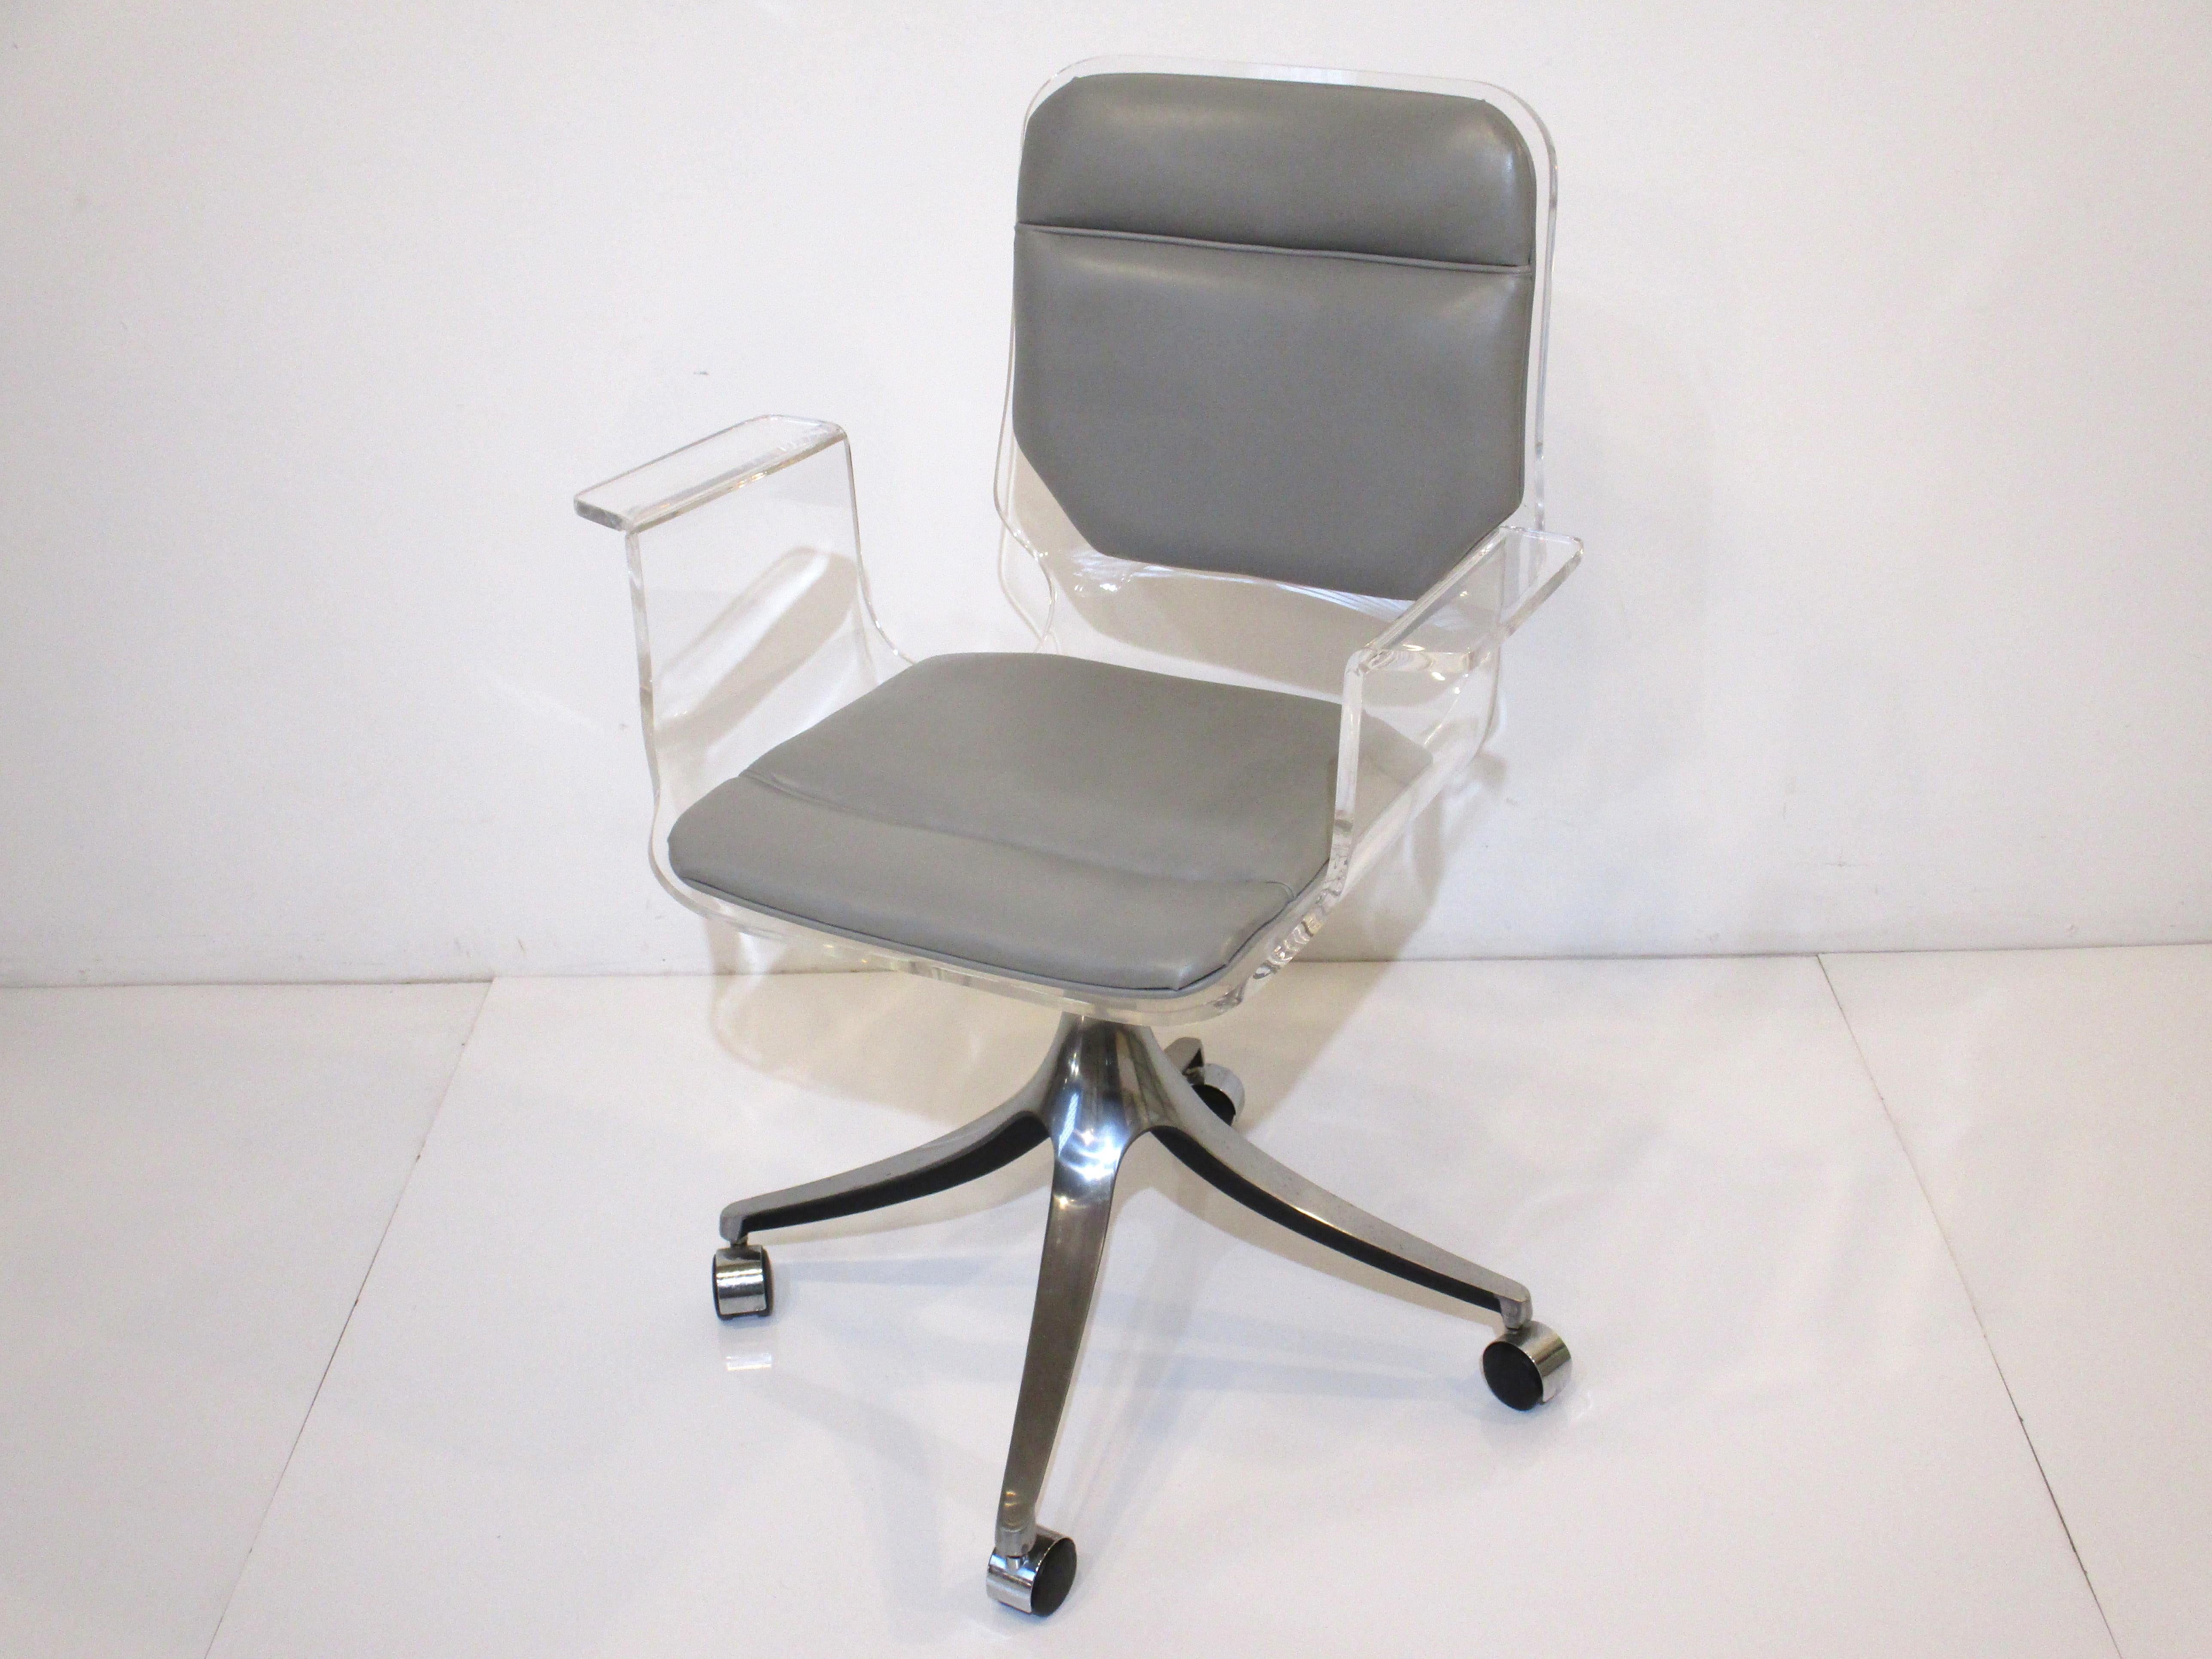 A sculptural rolling Lucite desk chair with sky blue leatherette seat back and bottom having a polished cast steel base with black wheels. A very comfortable chair with wing styled armrests perfect for that Lucite or glass desk crafted by the Hill